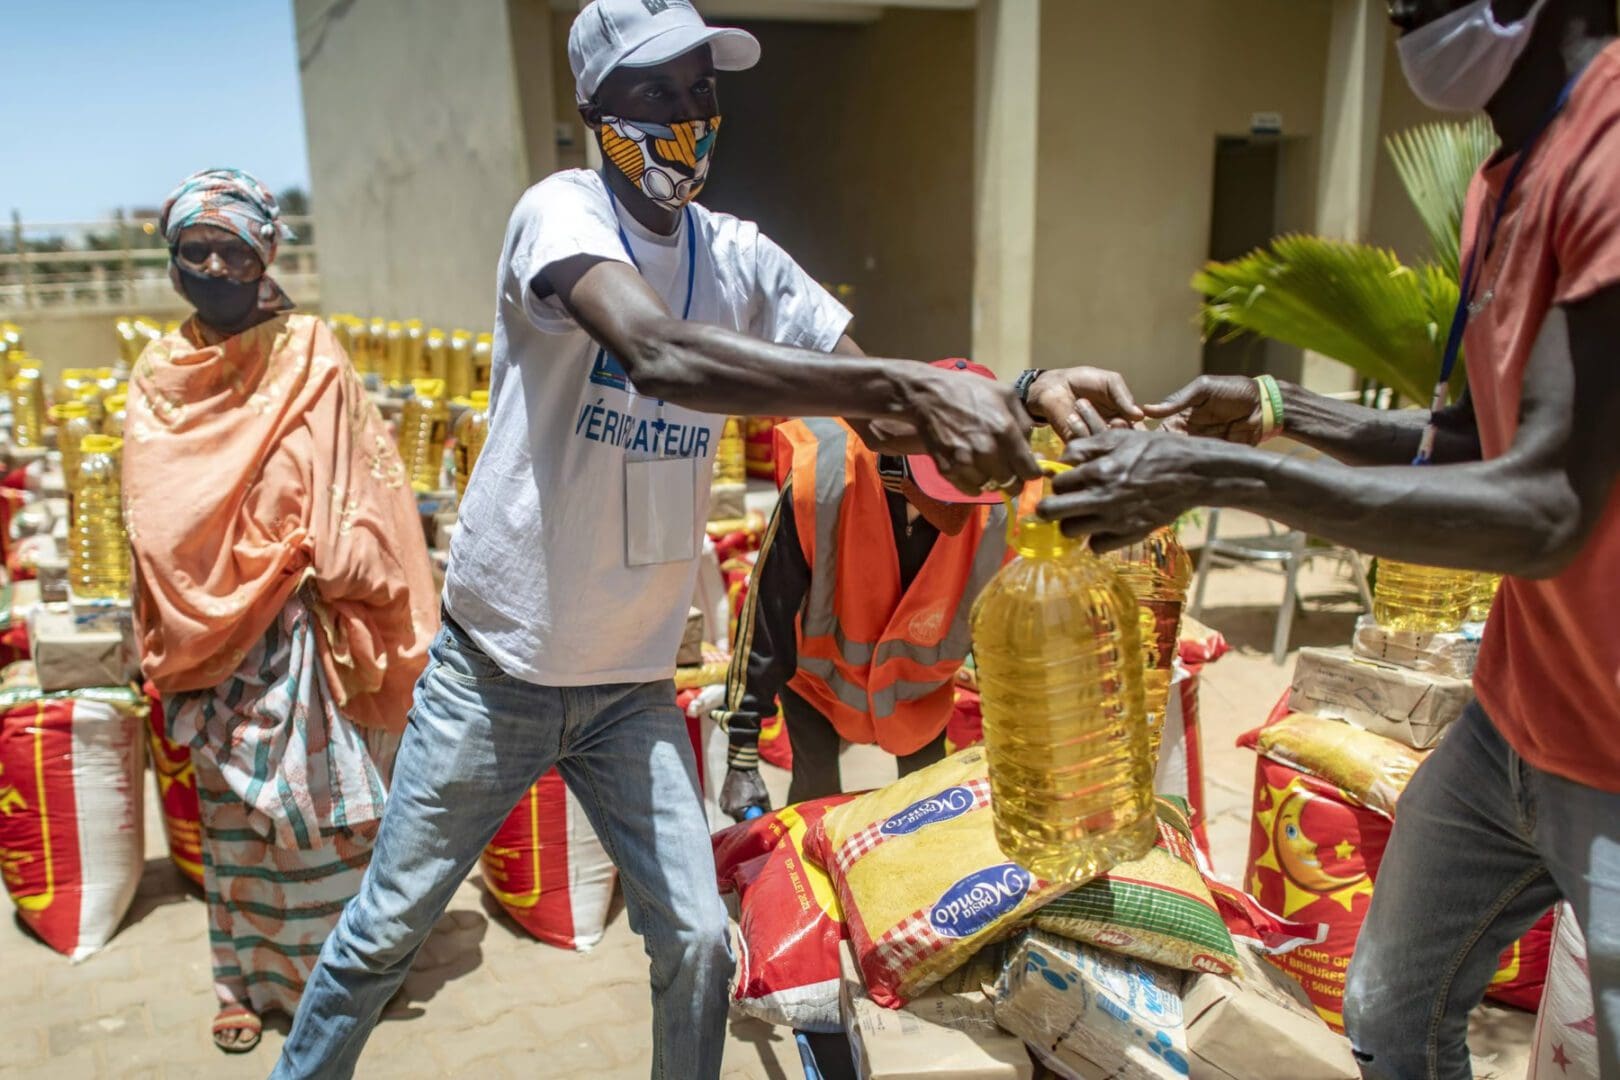 People distributing food and supplies during a relief effort.